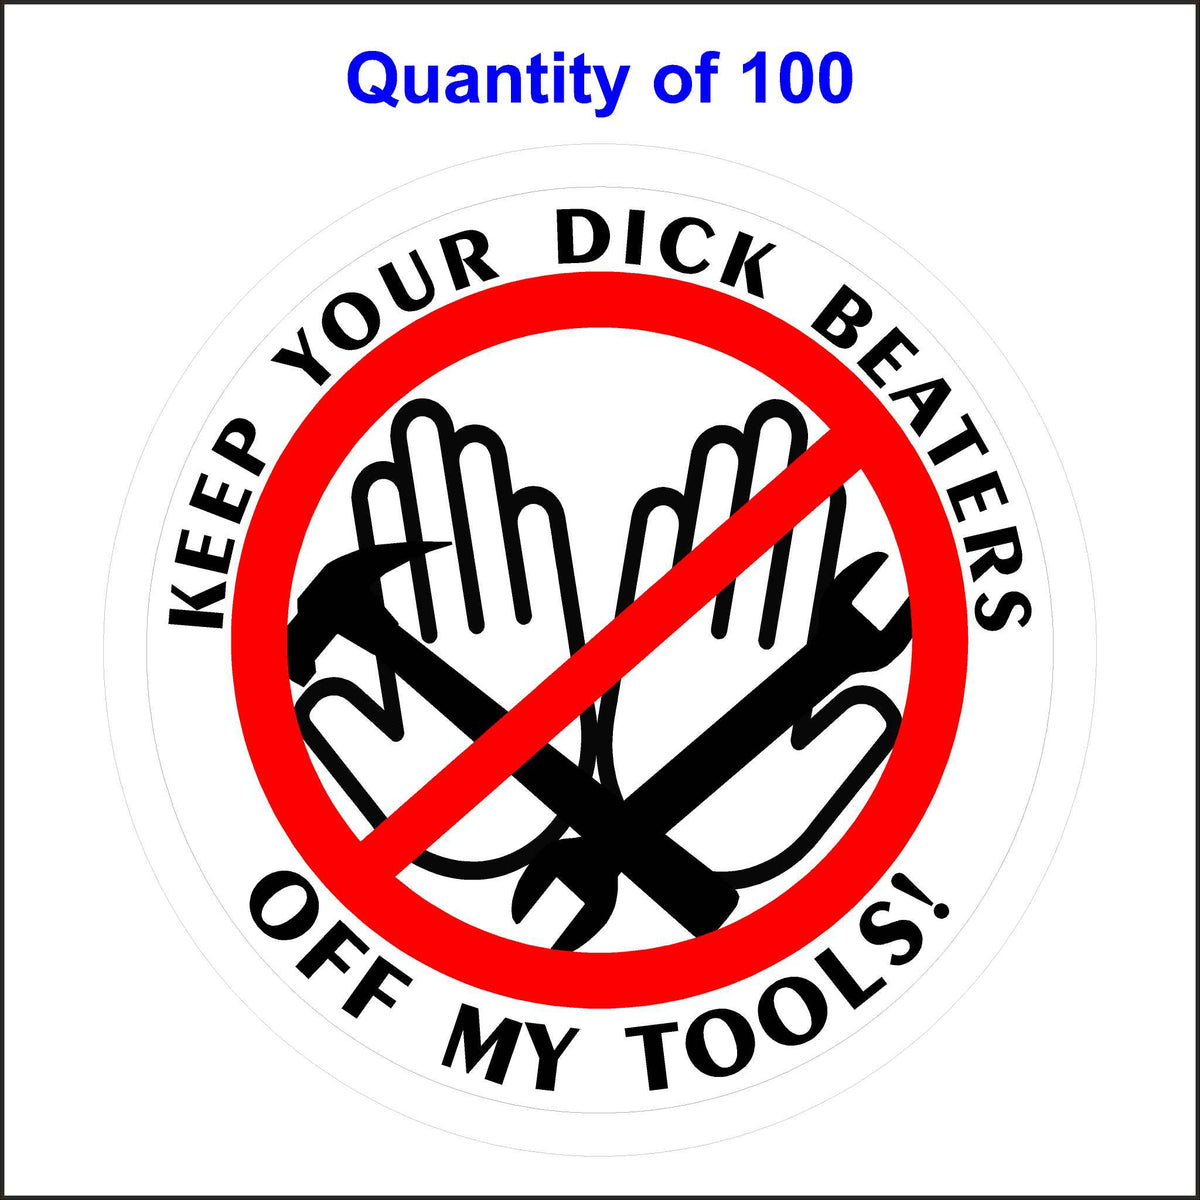 Keep Your Dick Beaters Off My Tools Sticker. 100 Quantity.